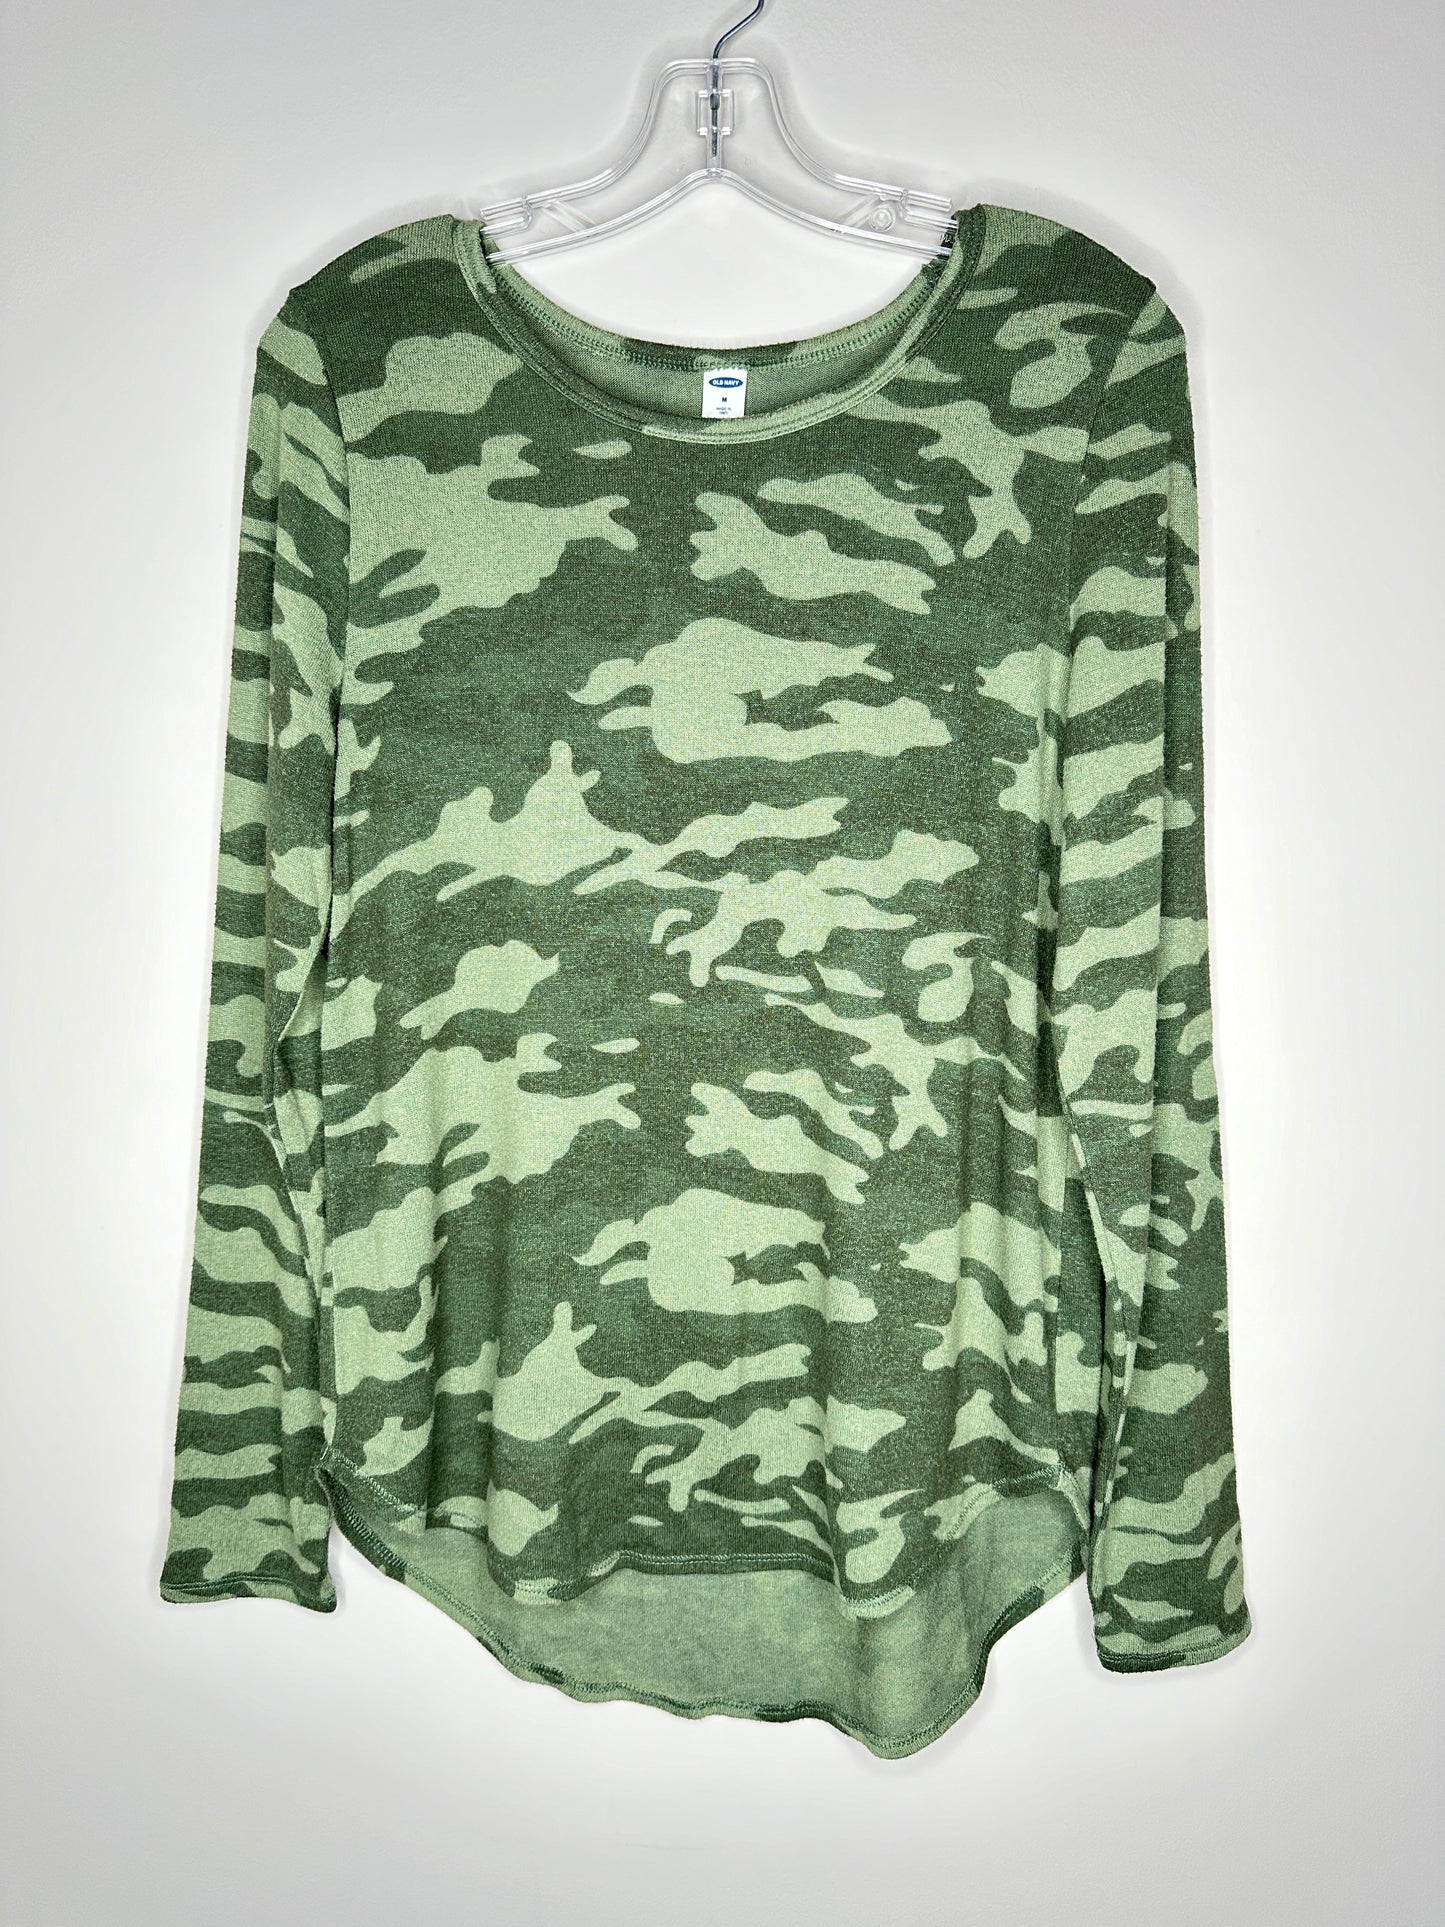 Old Navy Size M Green Camo Long Sleeve Tee Sweater